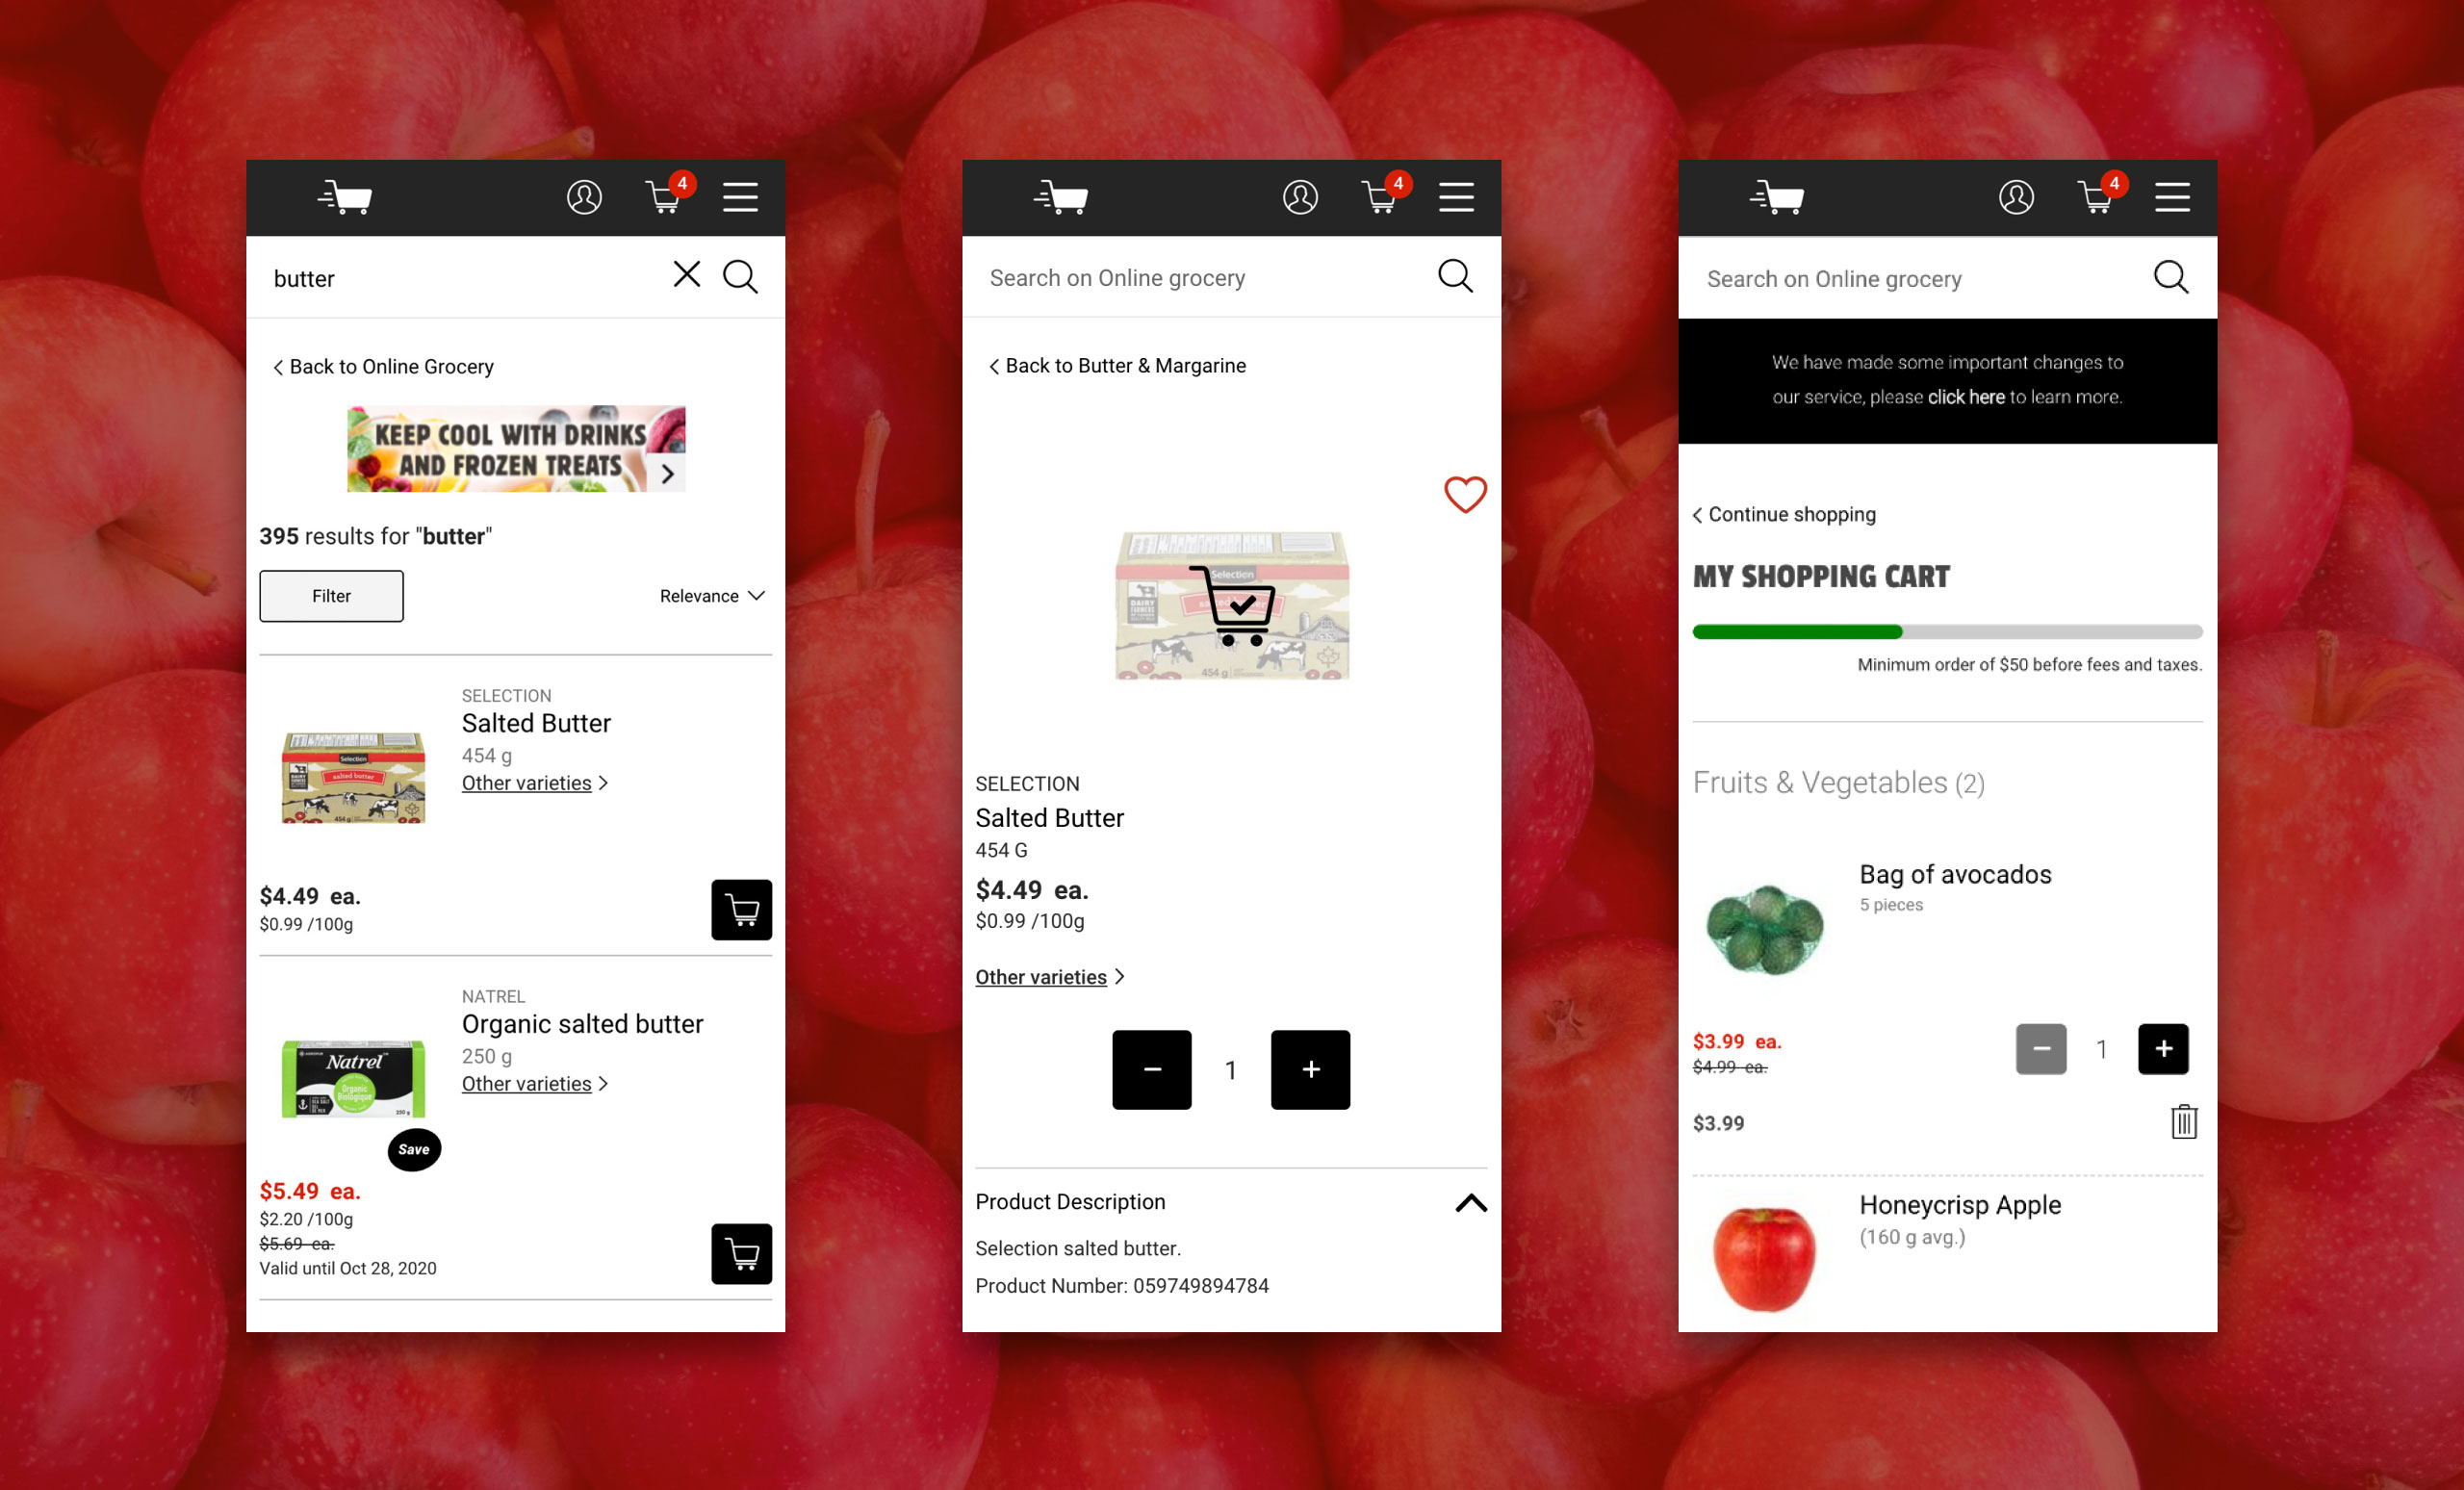 Three screens of an online grocery app showing a search results page for butter, a product page for butter, and a shopping cart